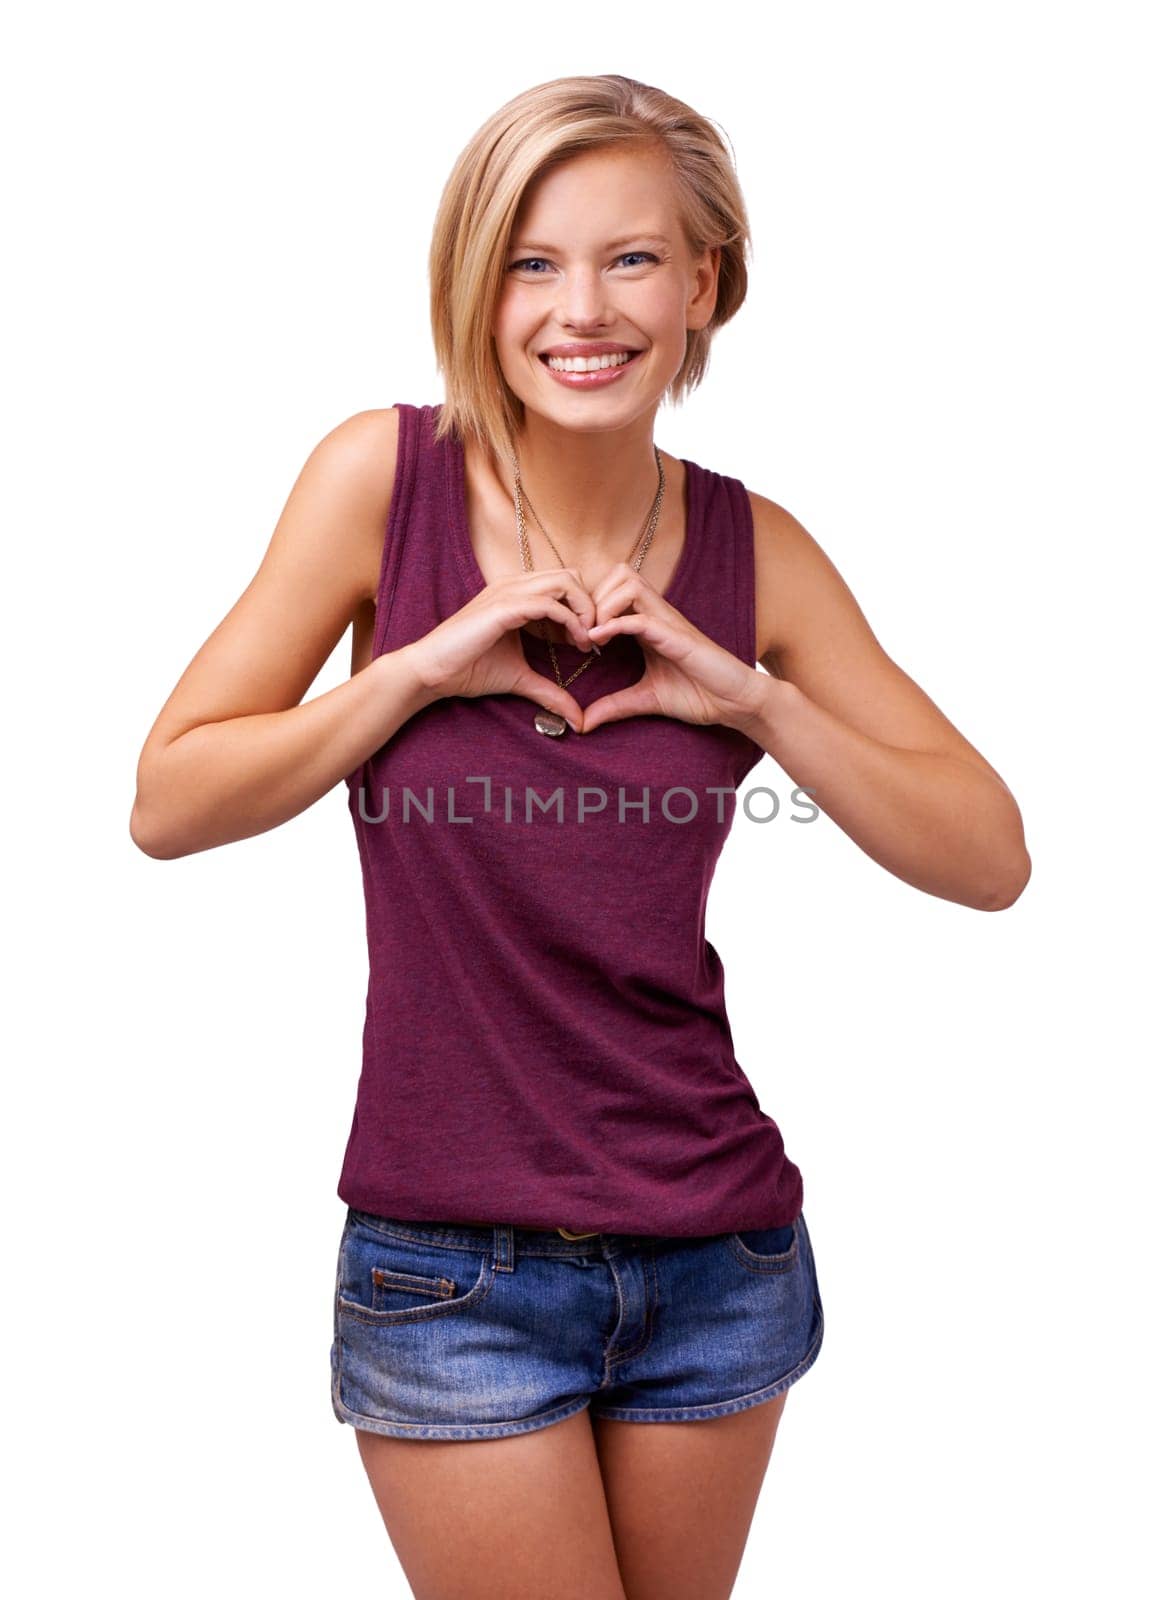 Happy woman, portrait and heart hands with love in care, support or romance on a white studio background. Young female person, blonde or model with smile, like emoji or shape sign of romantic gesture.